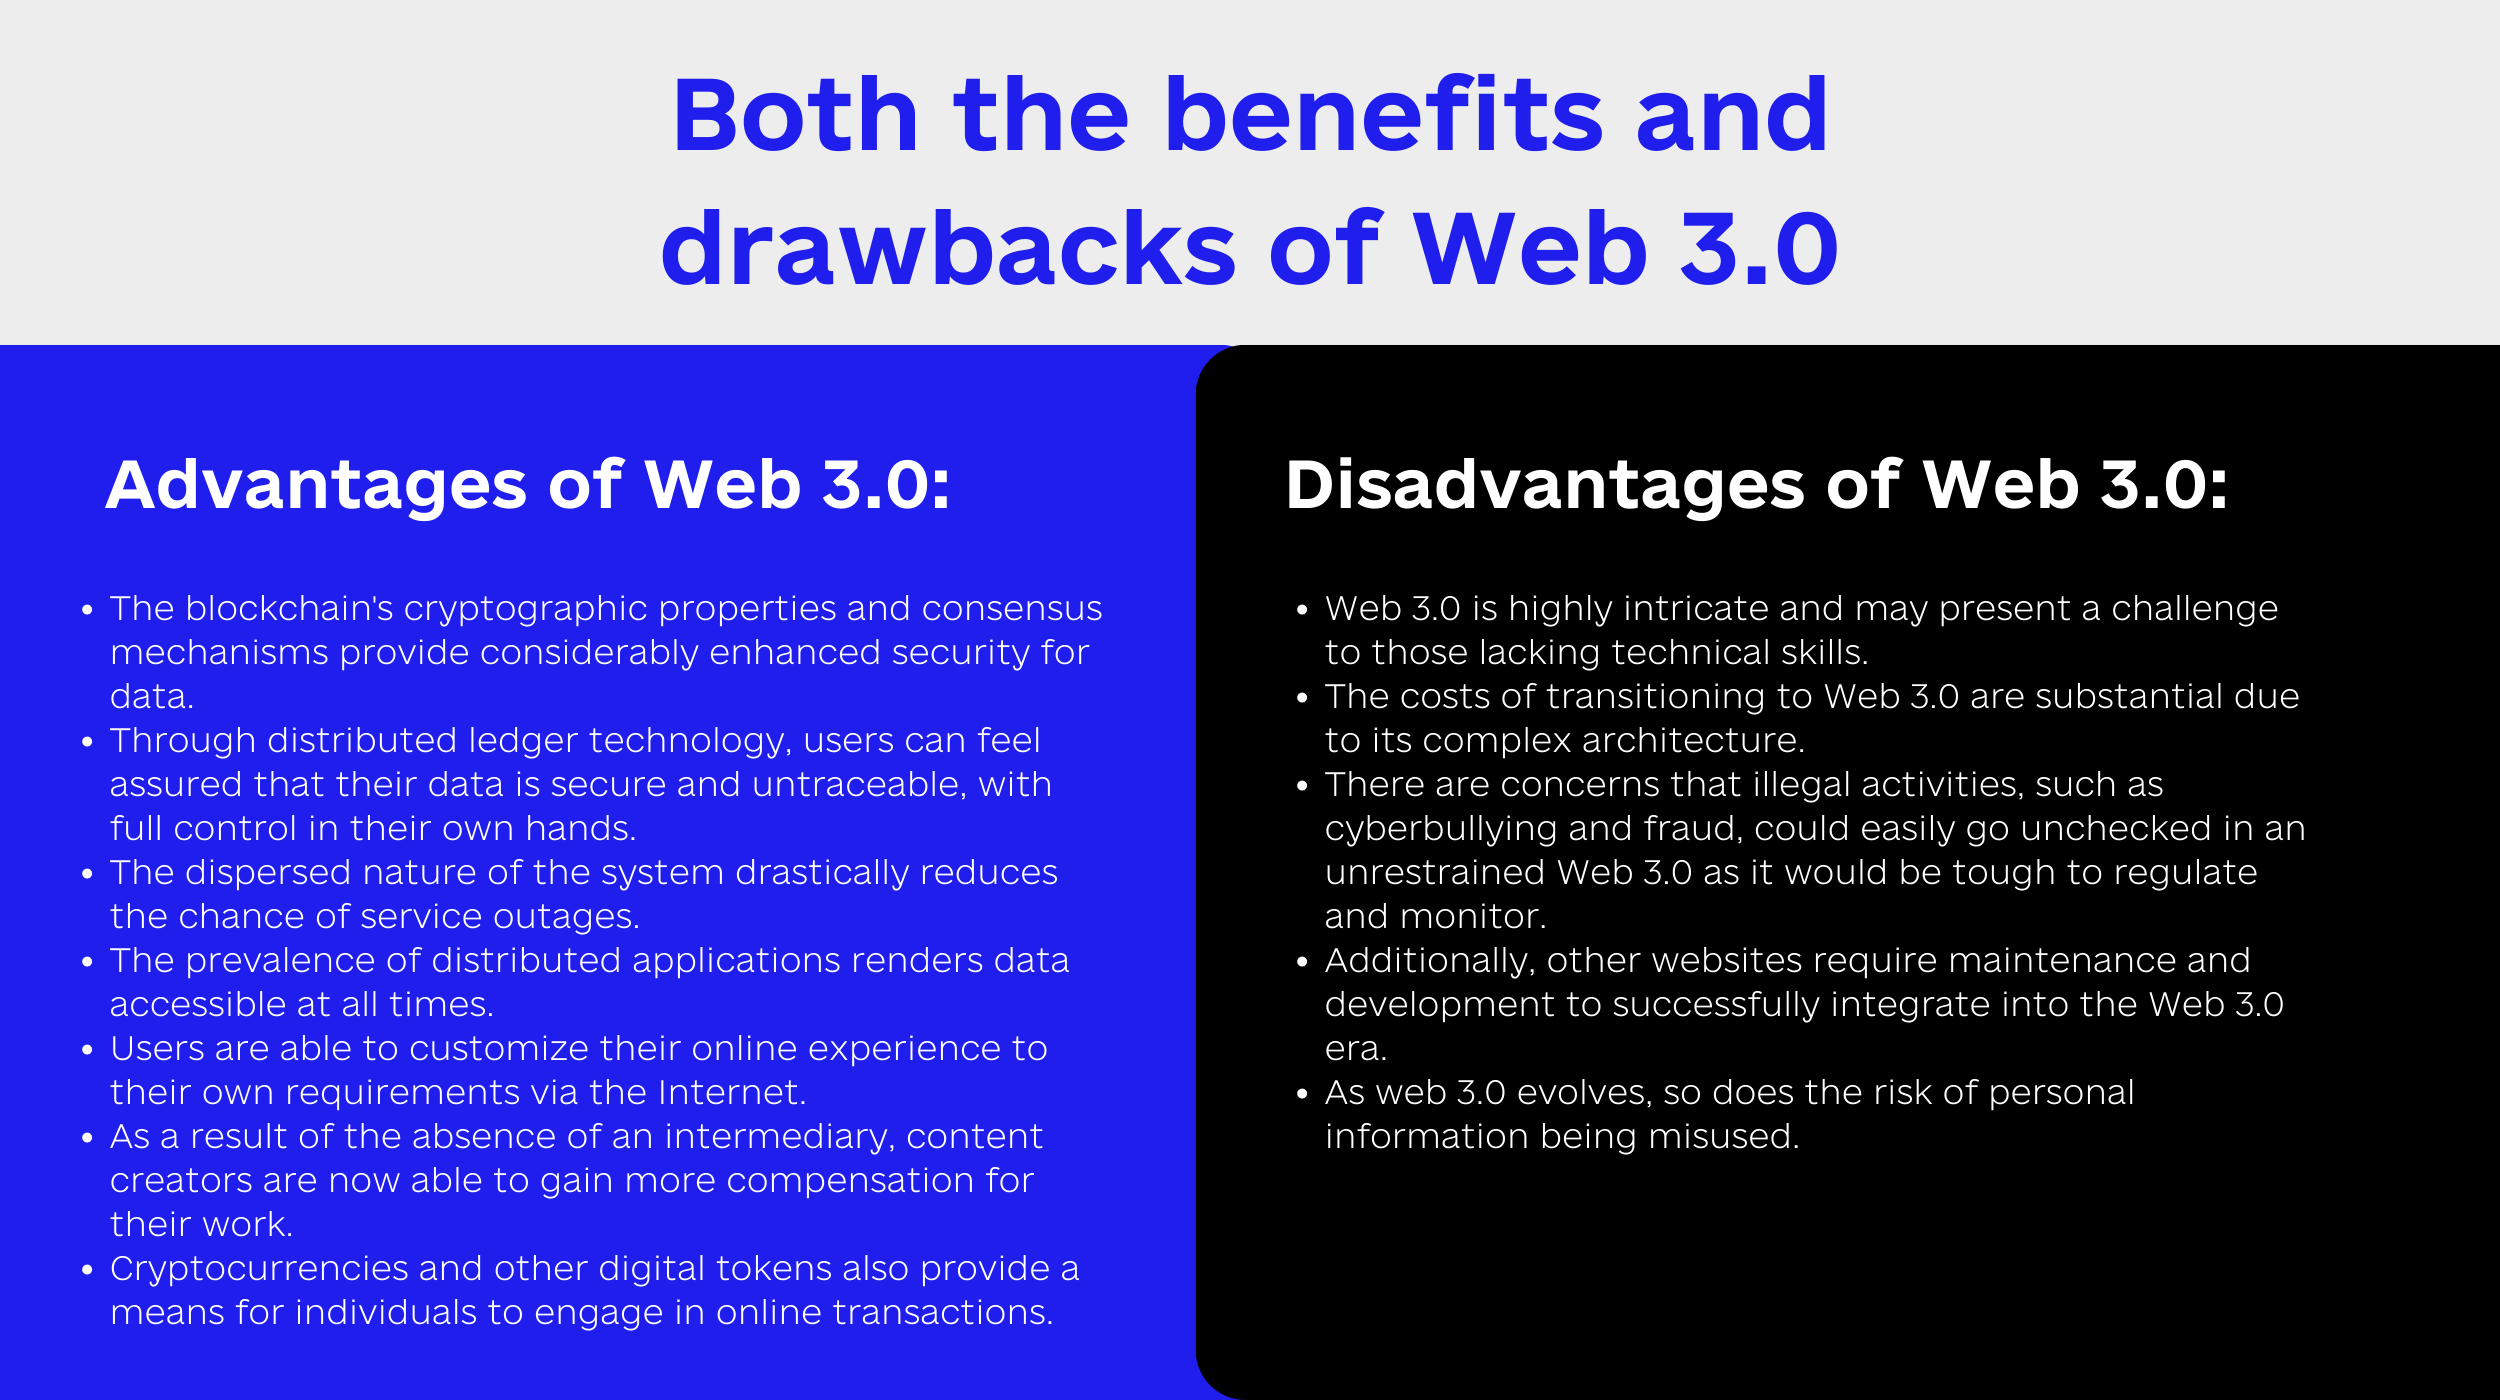 What do Web 3.0 users engage in?